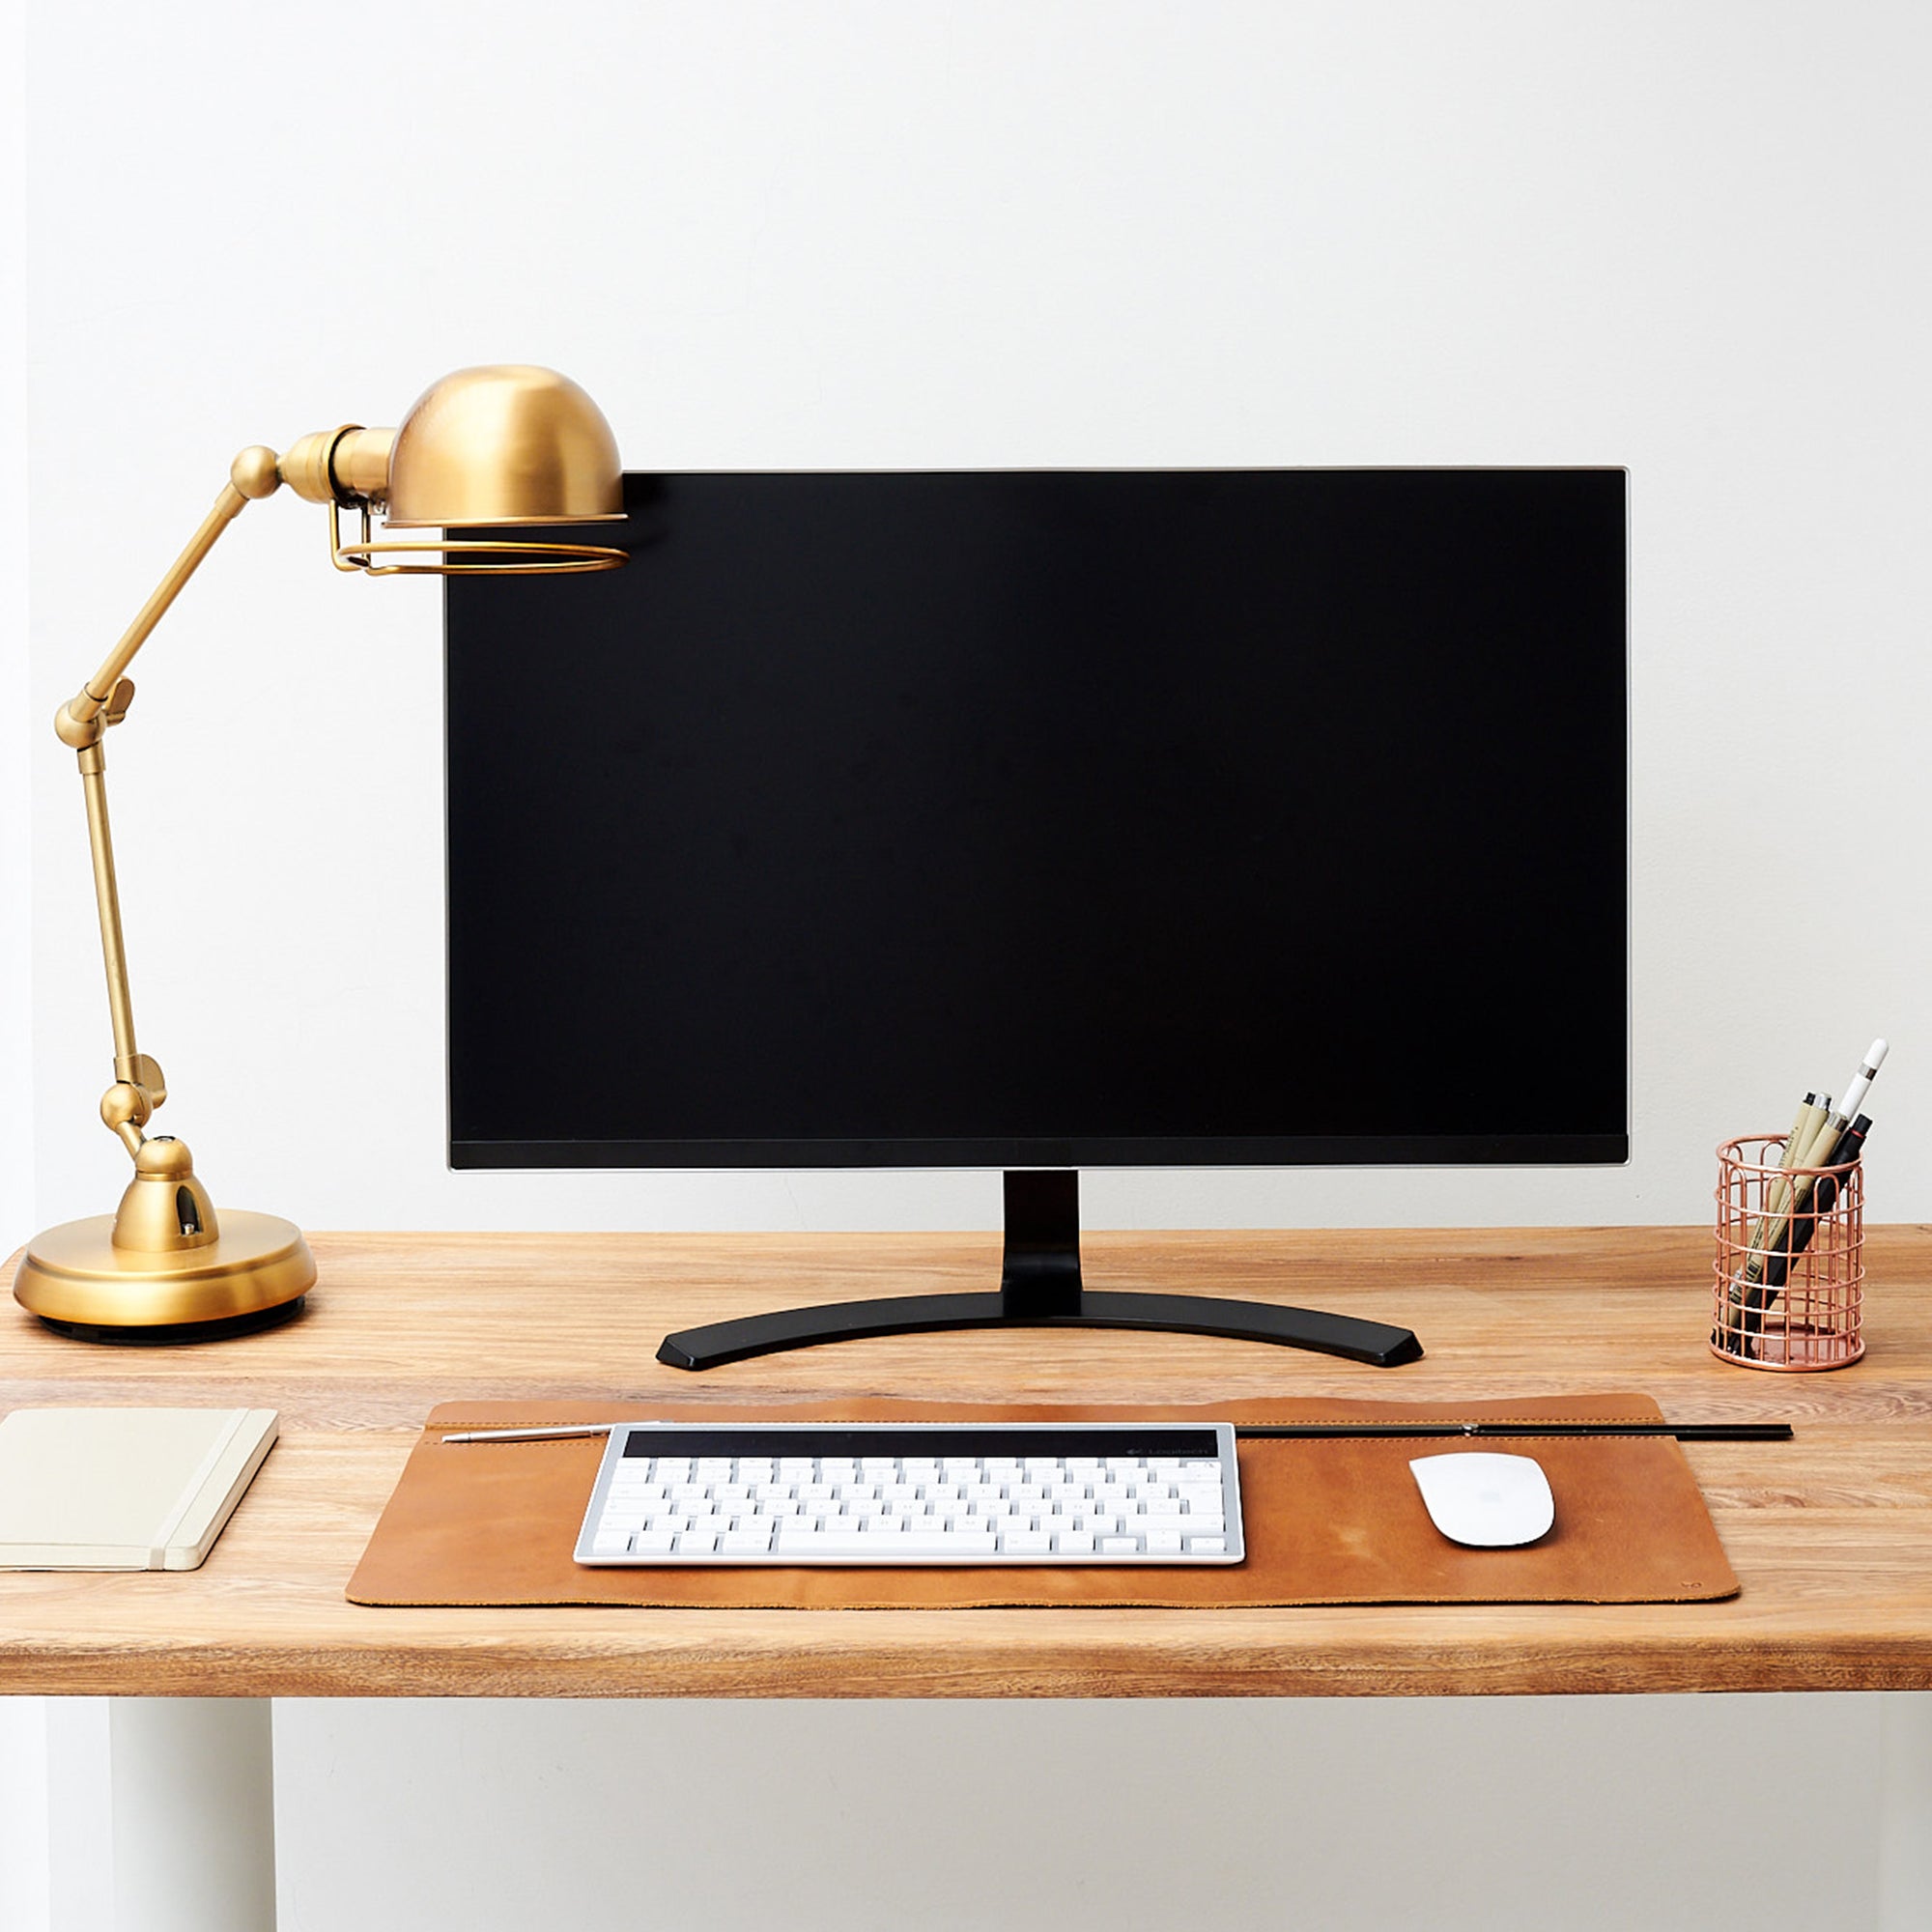 Leather Desk Pad. Workspace by Capra Leather